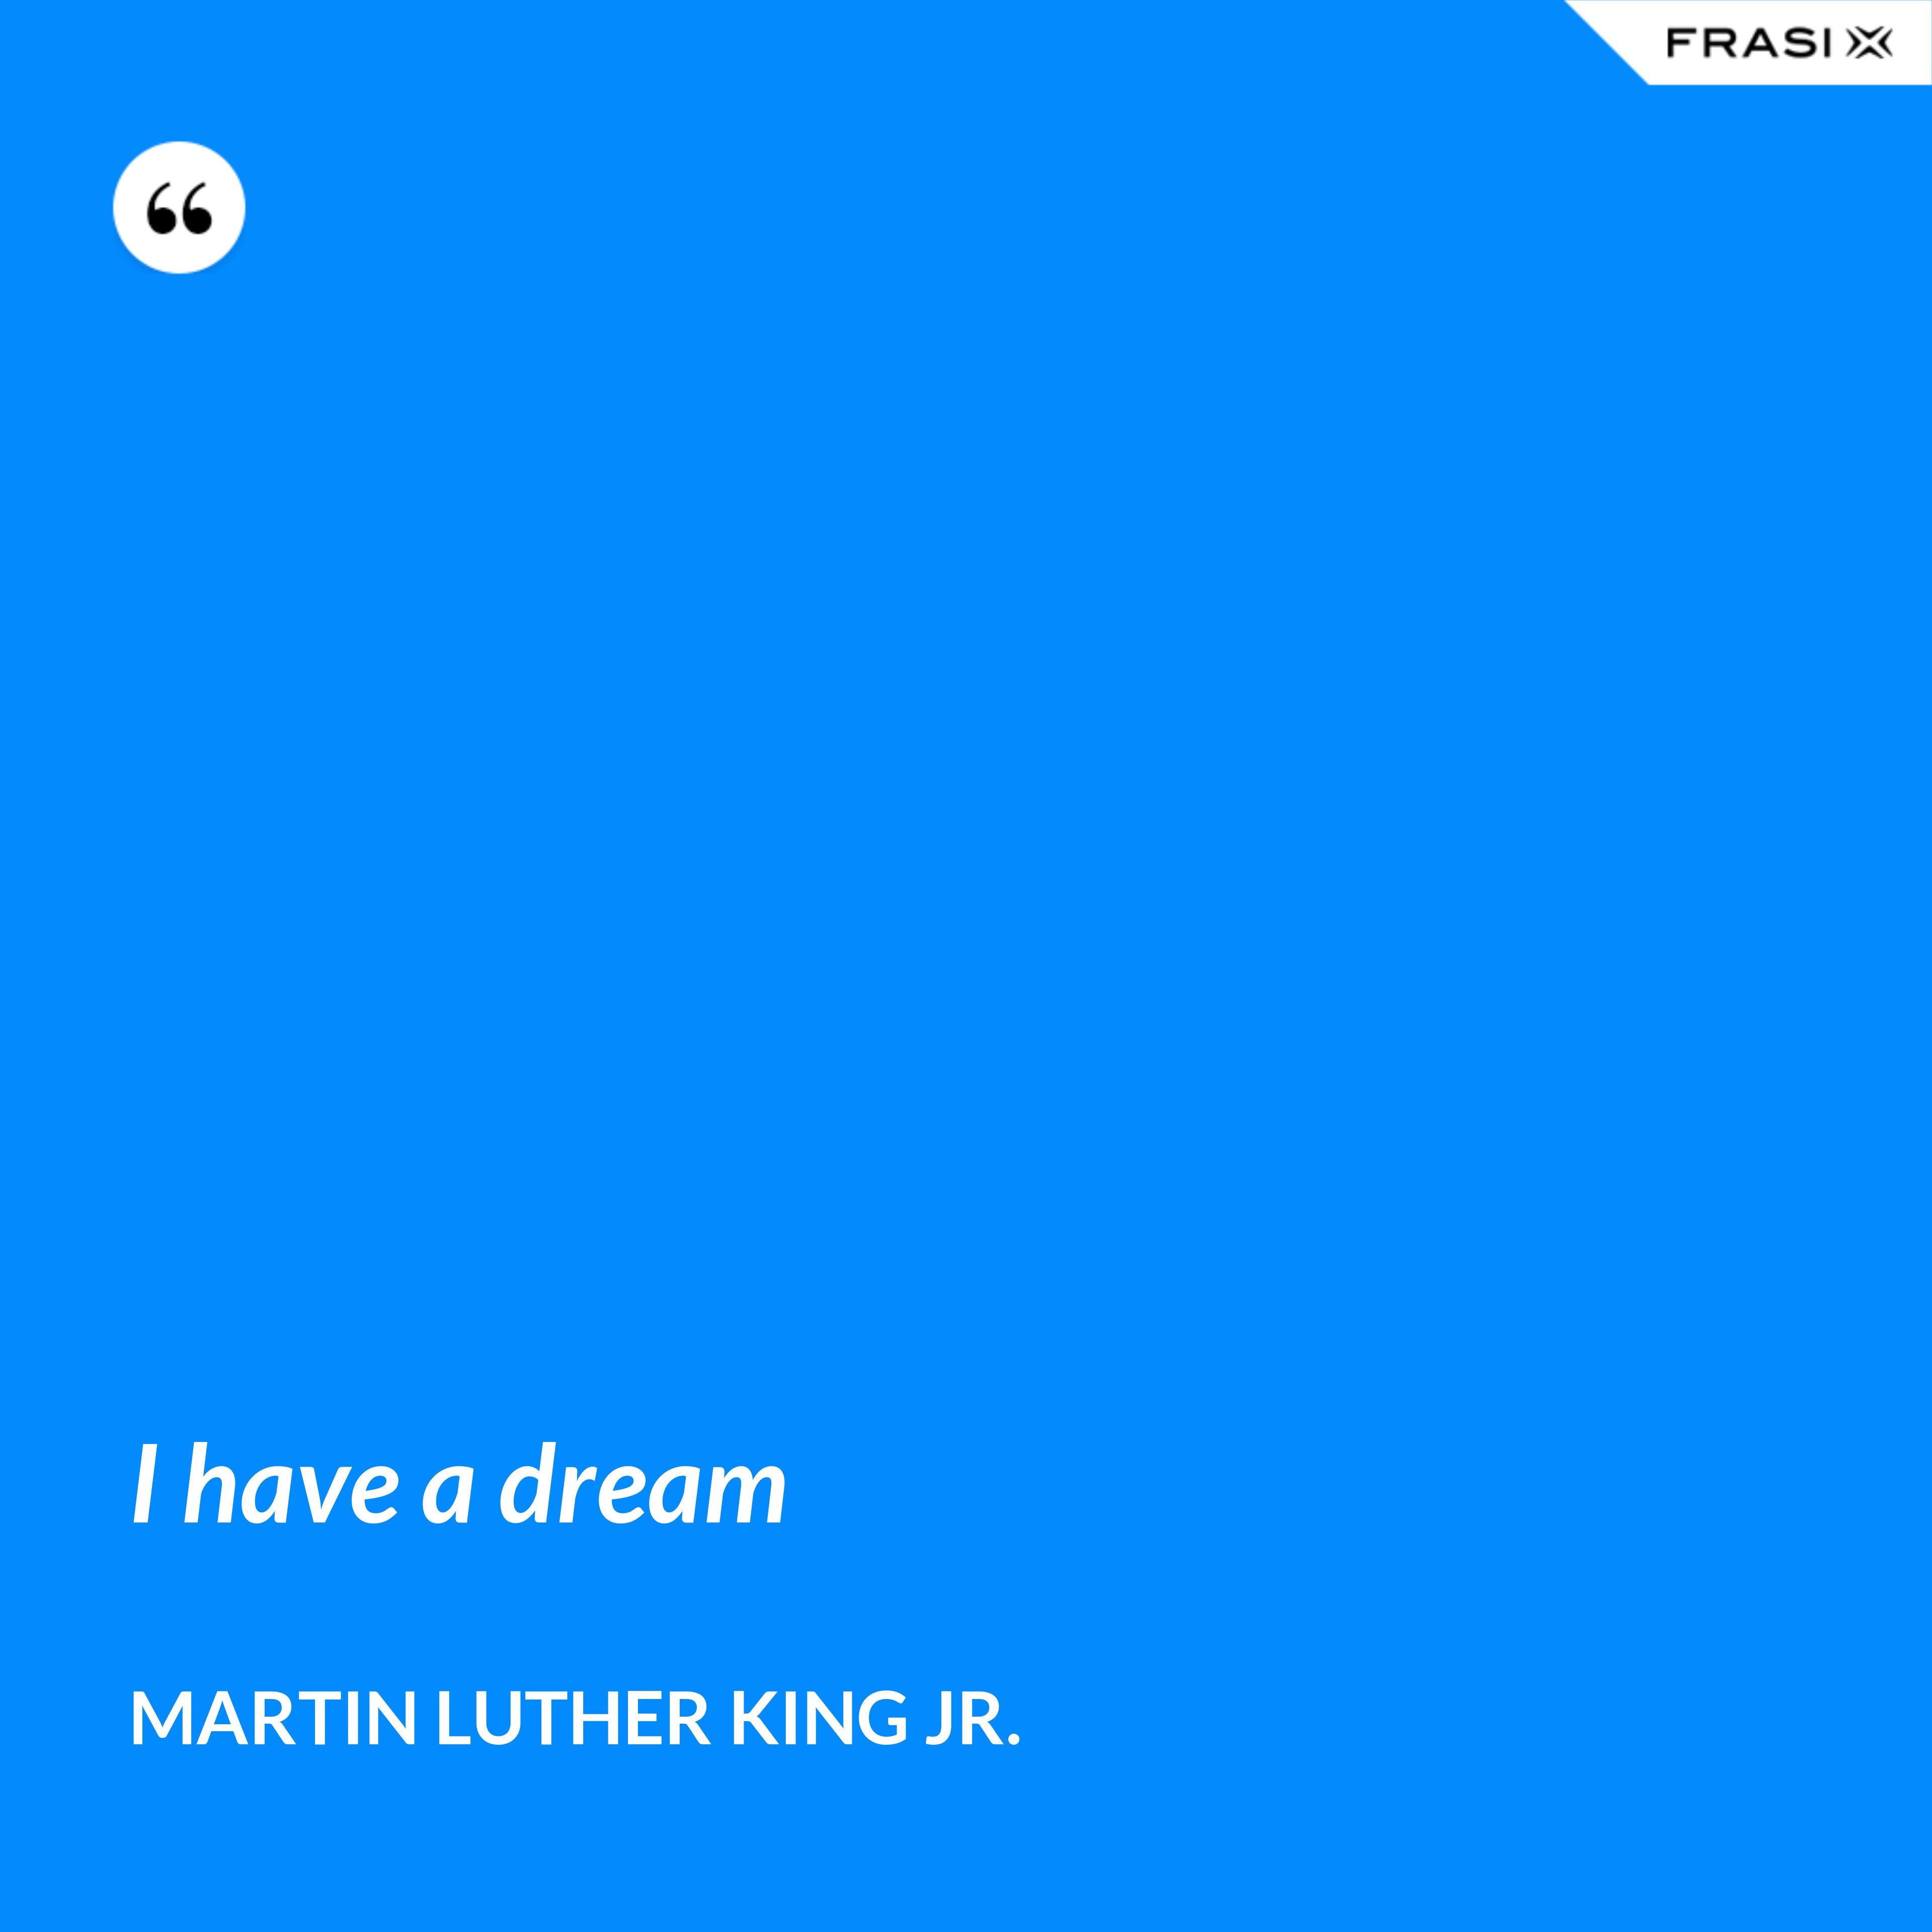 I have a dream - Martin Luther King Jr.